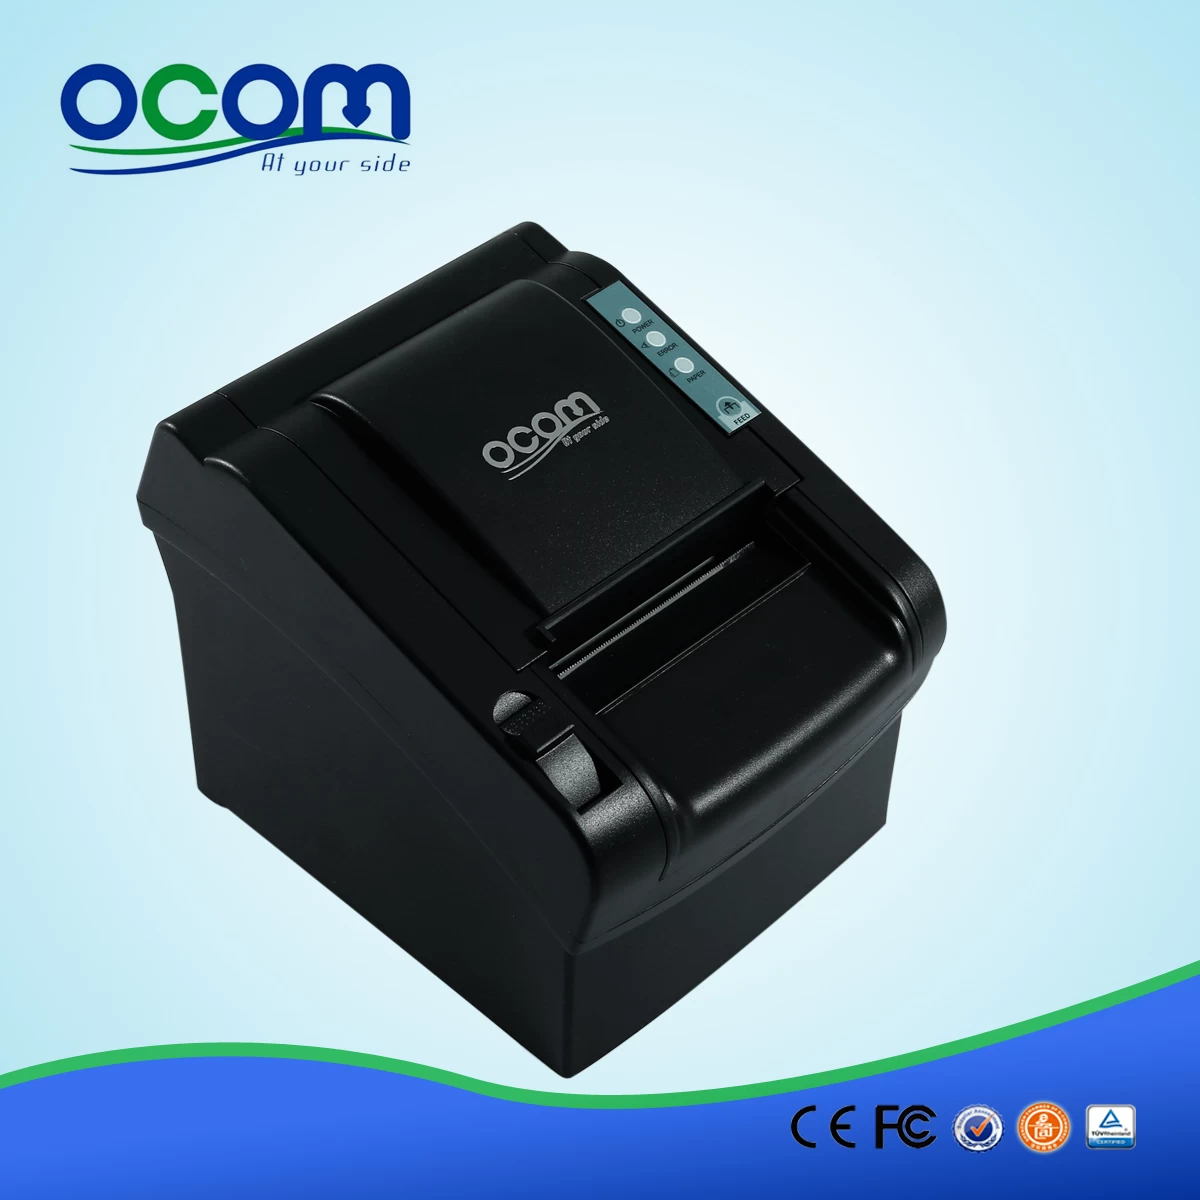 2016 Newest cheap 80mm thermal receipt printer pos